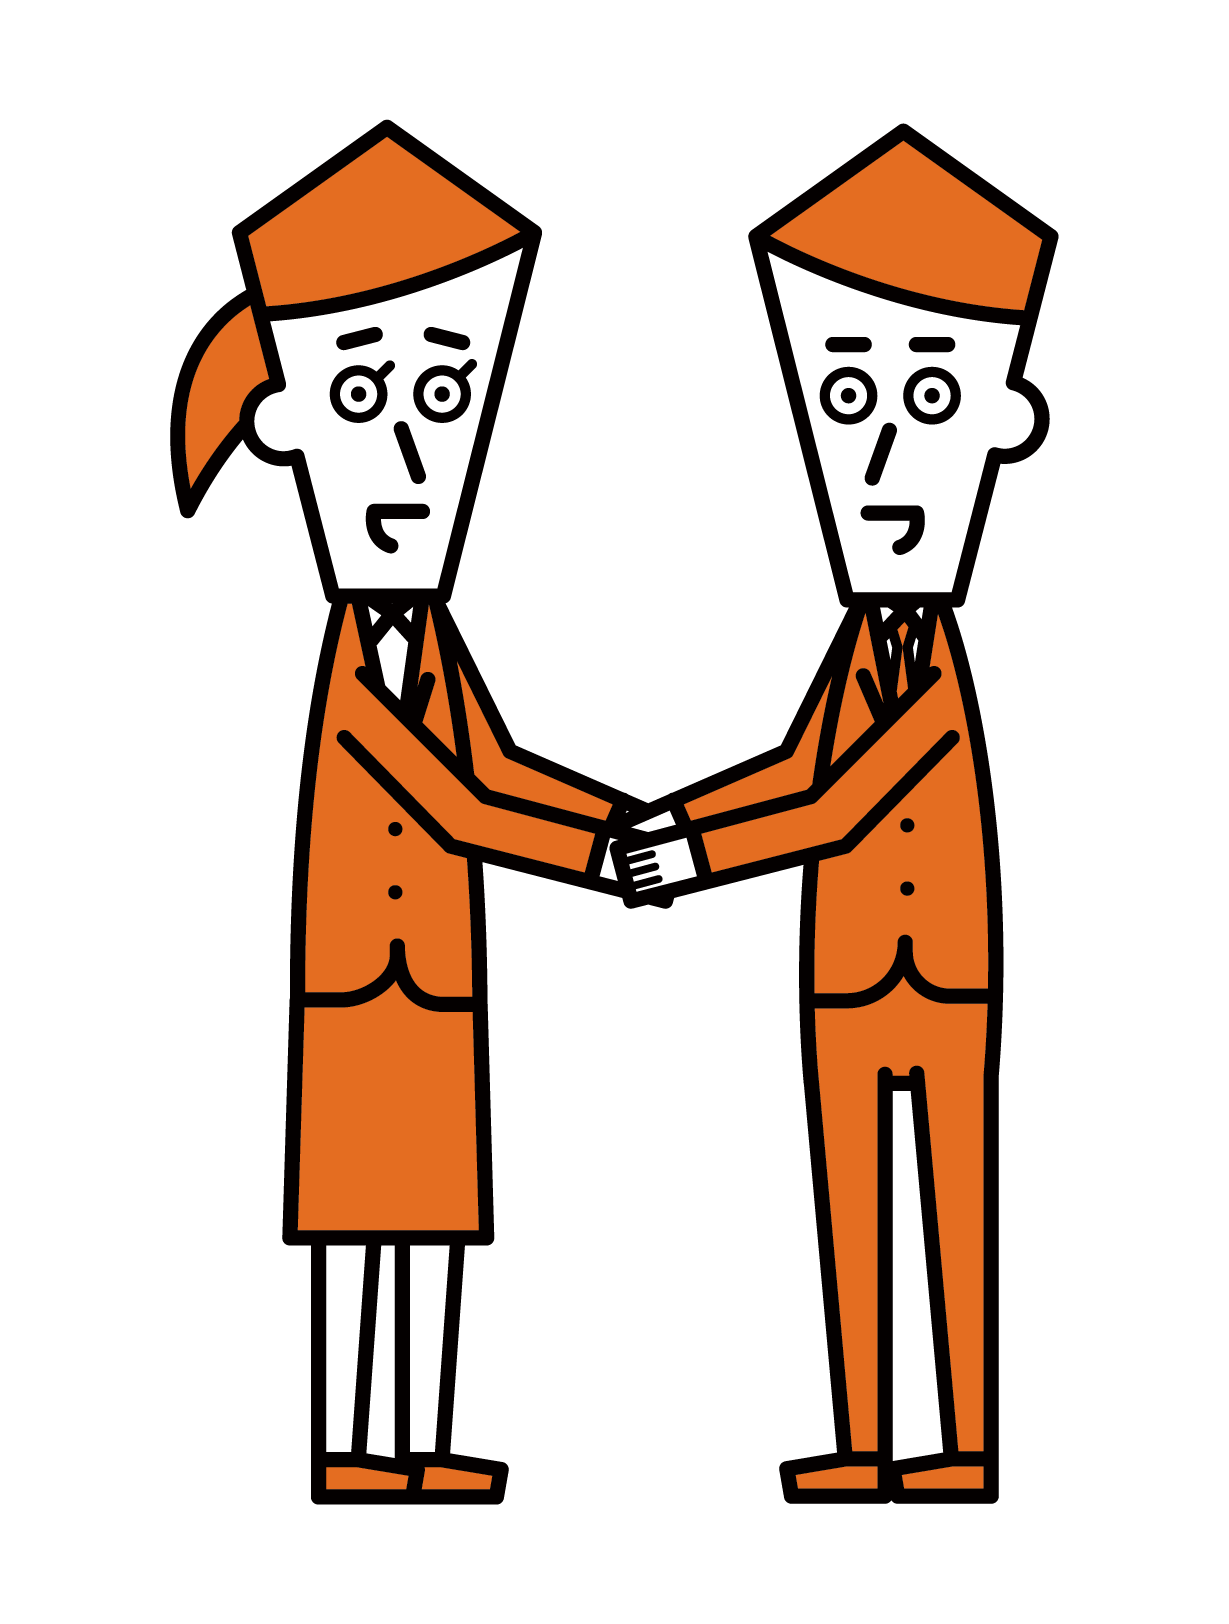 Illustration of a man and a woman shaking hands